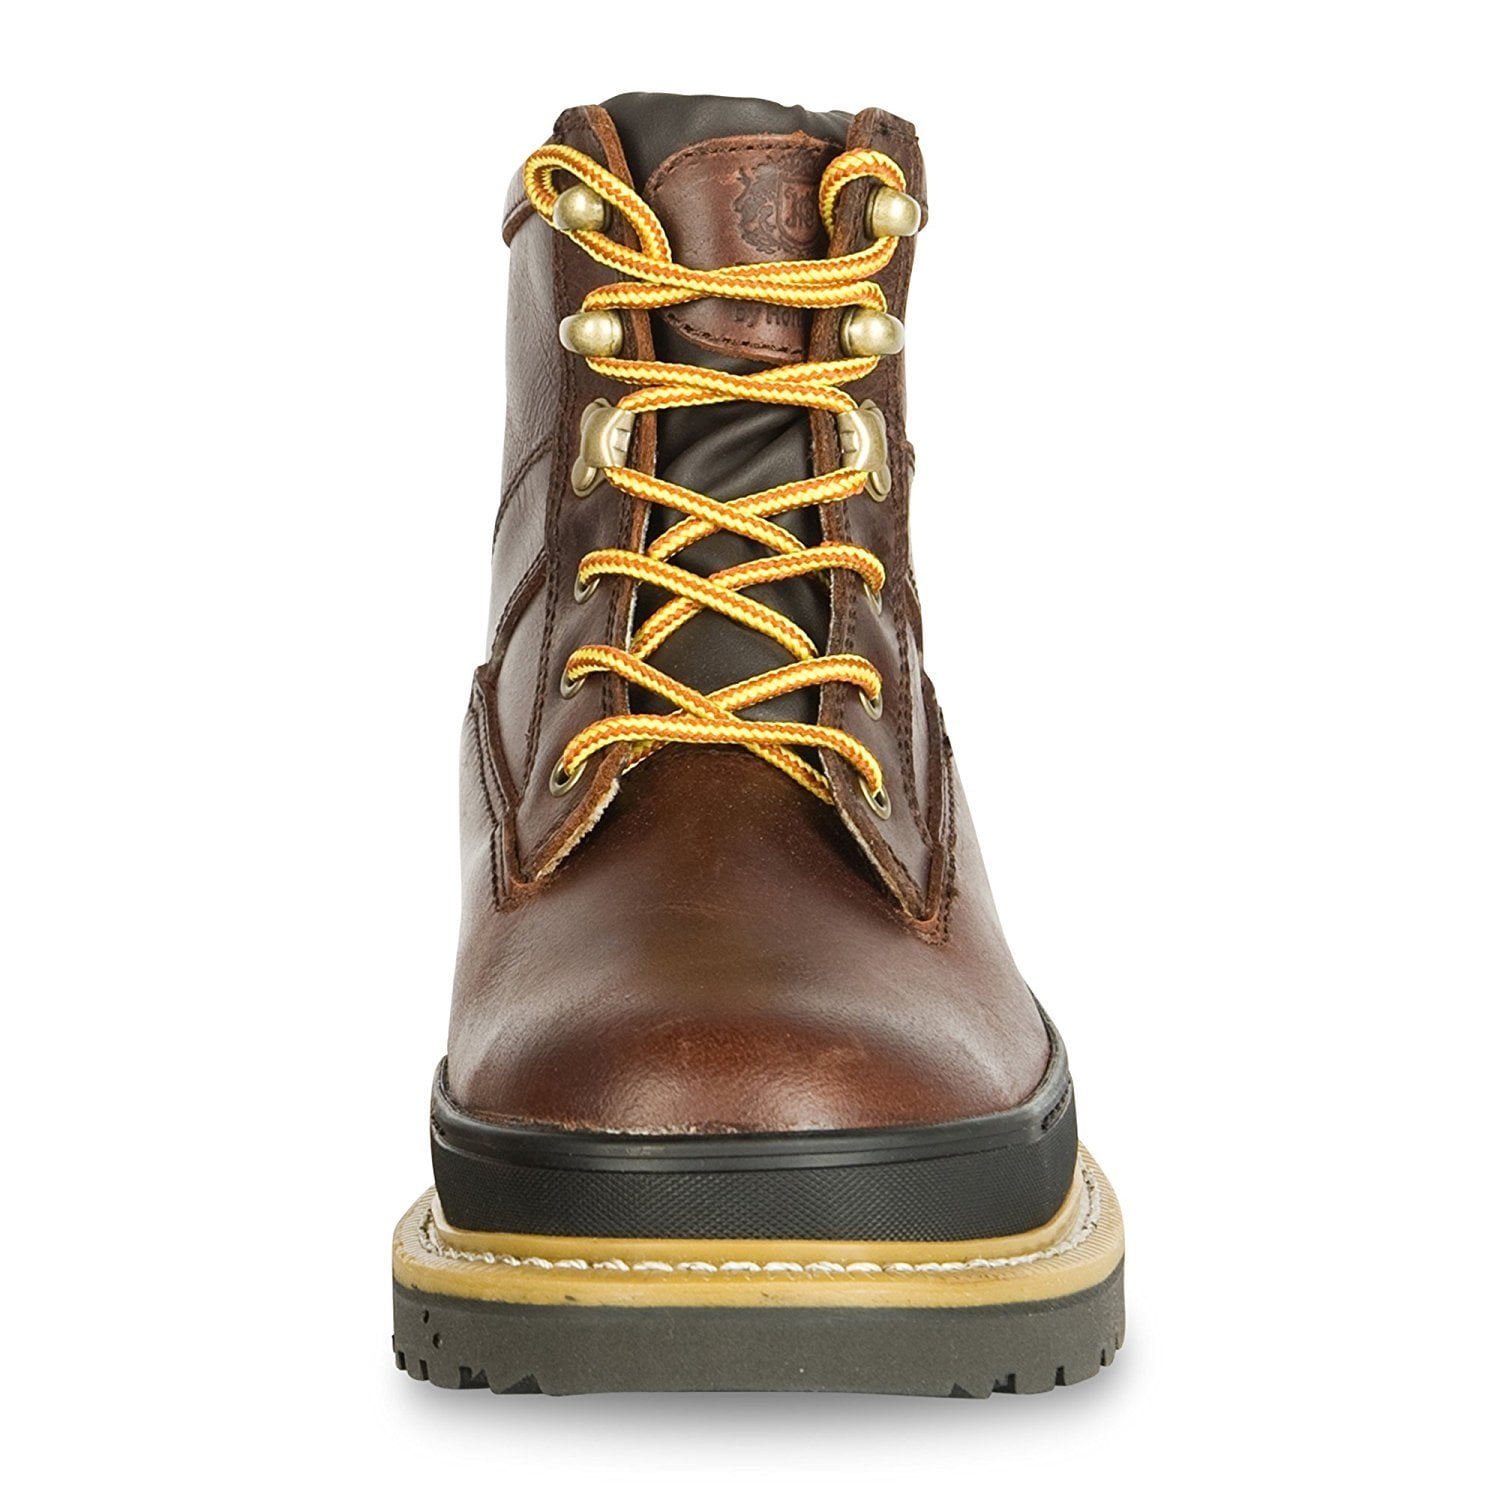 king's by honeywell kgeo2 steel toe goodyear welted leather work boot